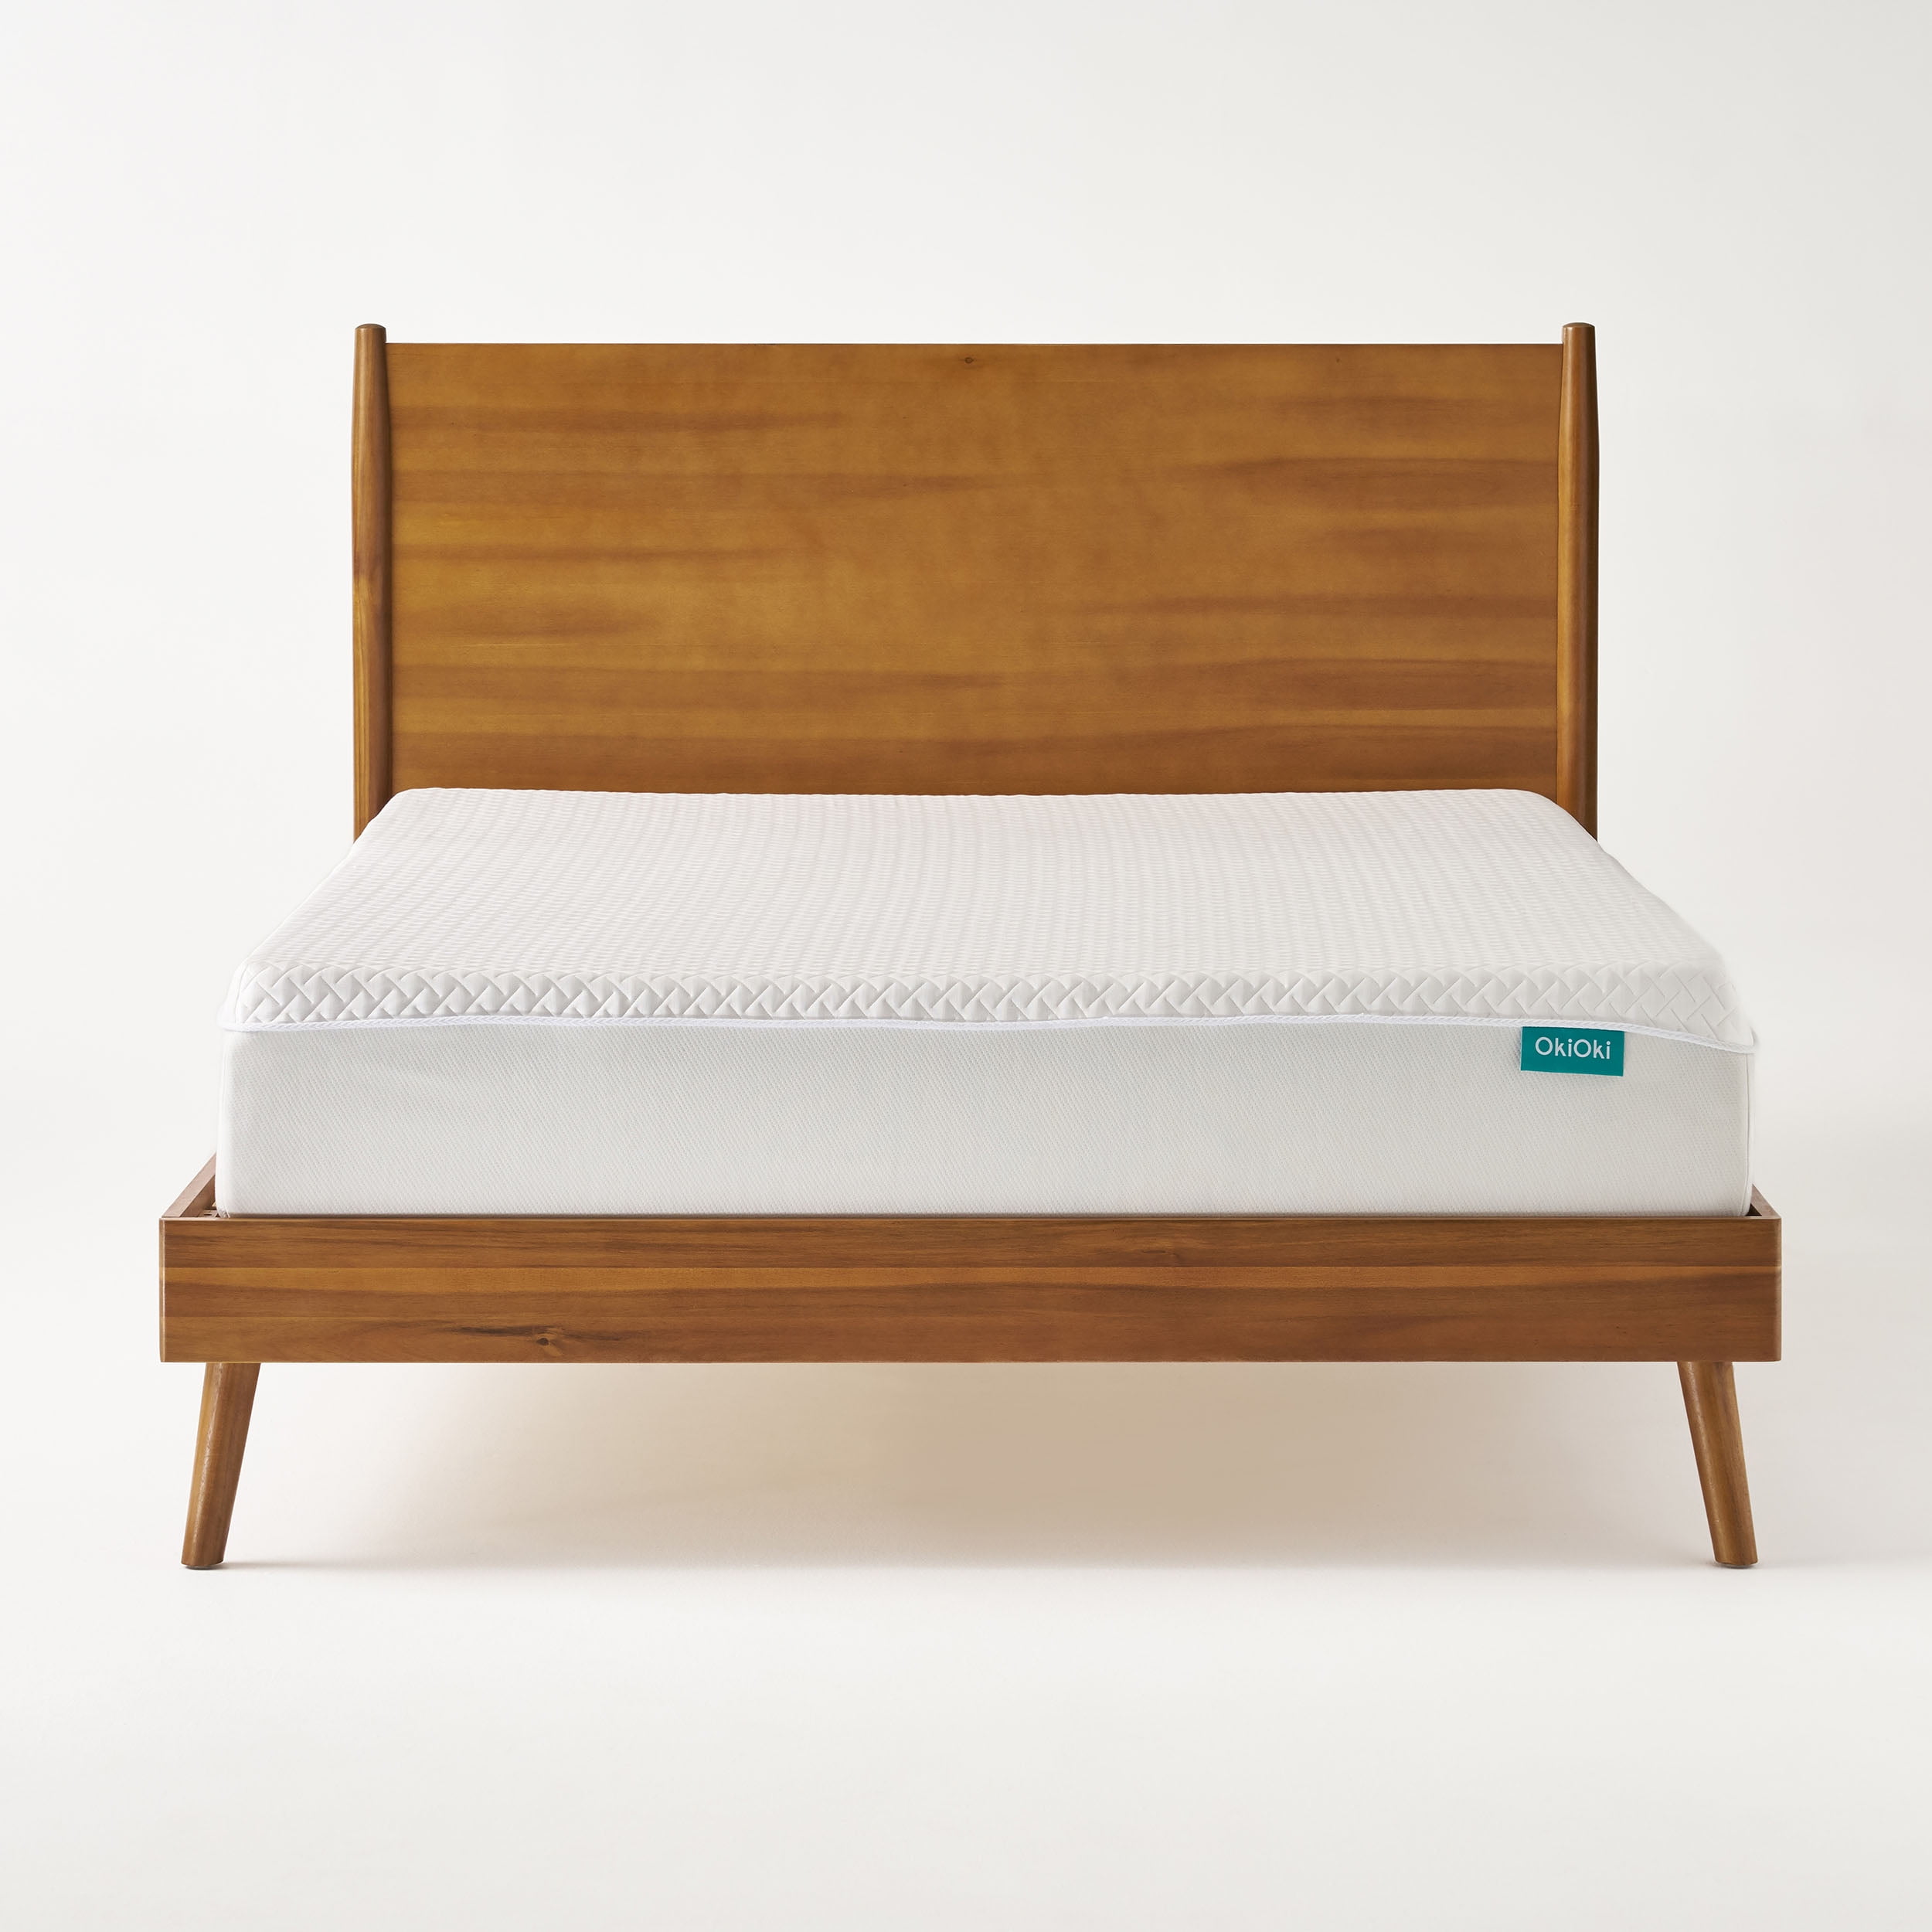 Okisoft Mattresid Century Bed, How To Raise A Twin Bed